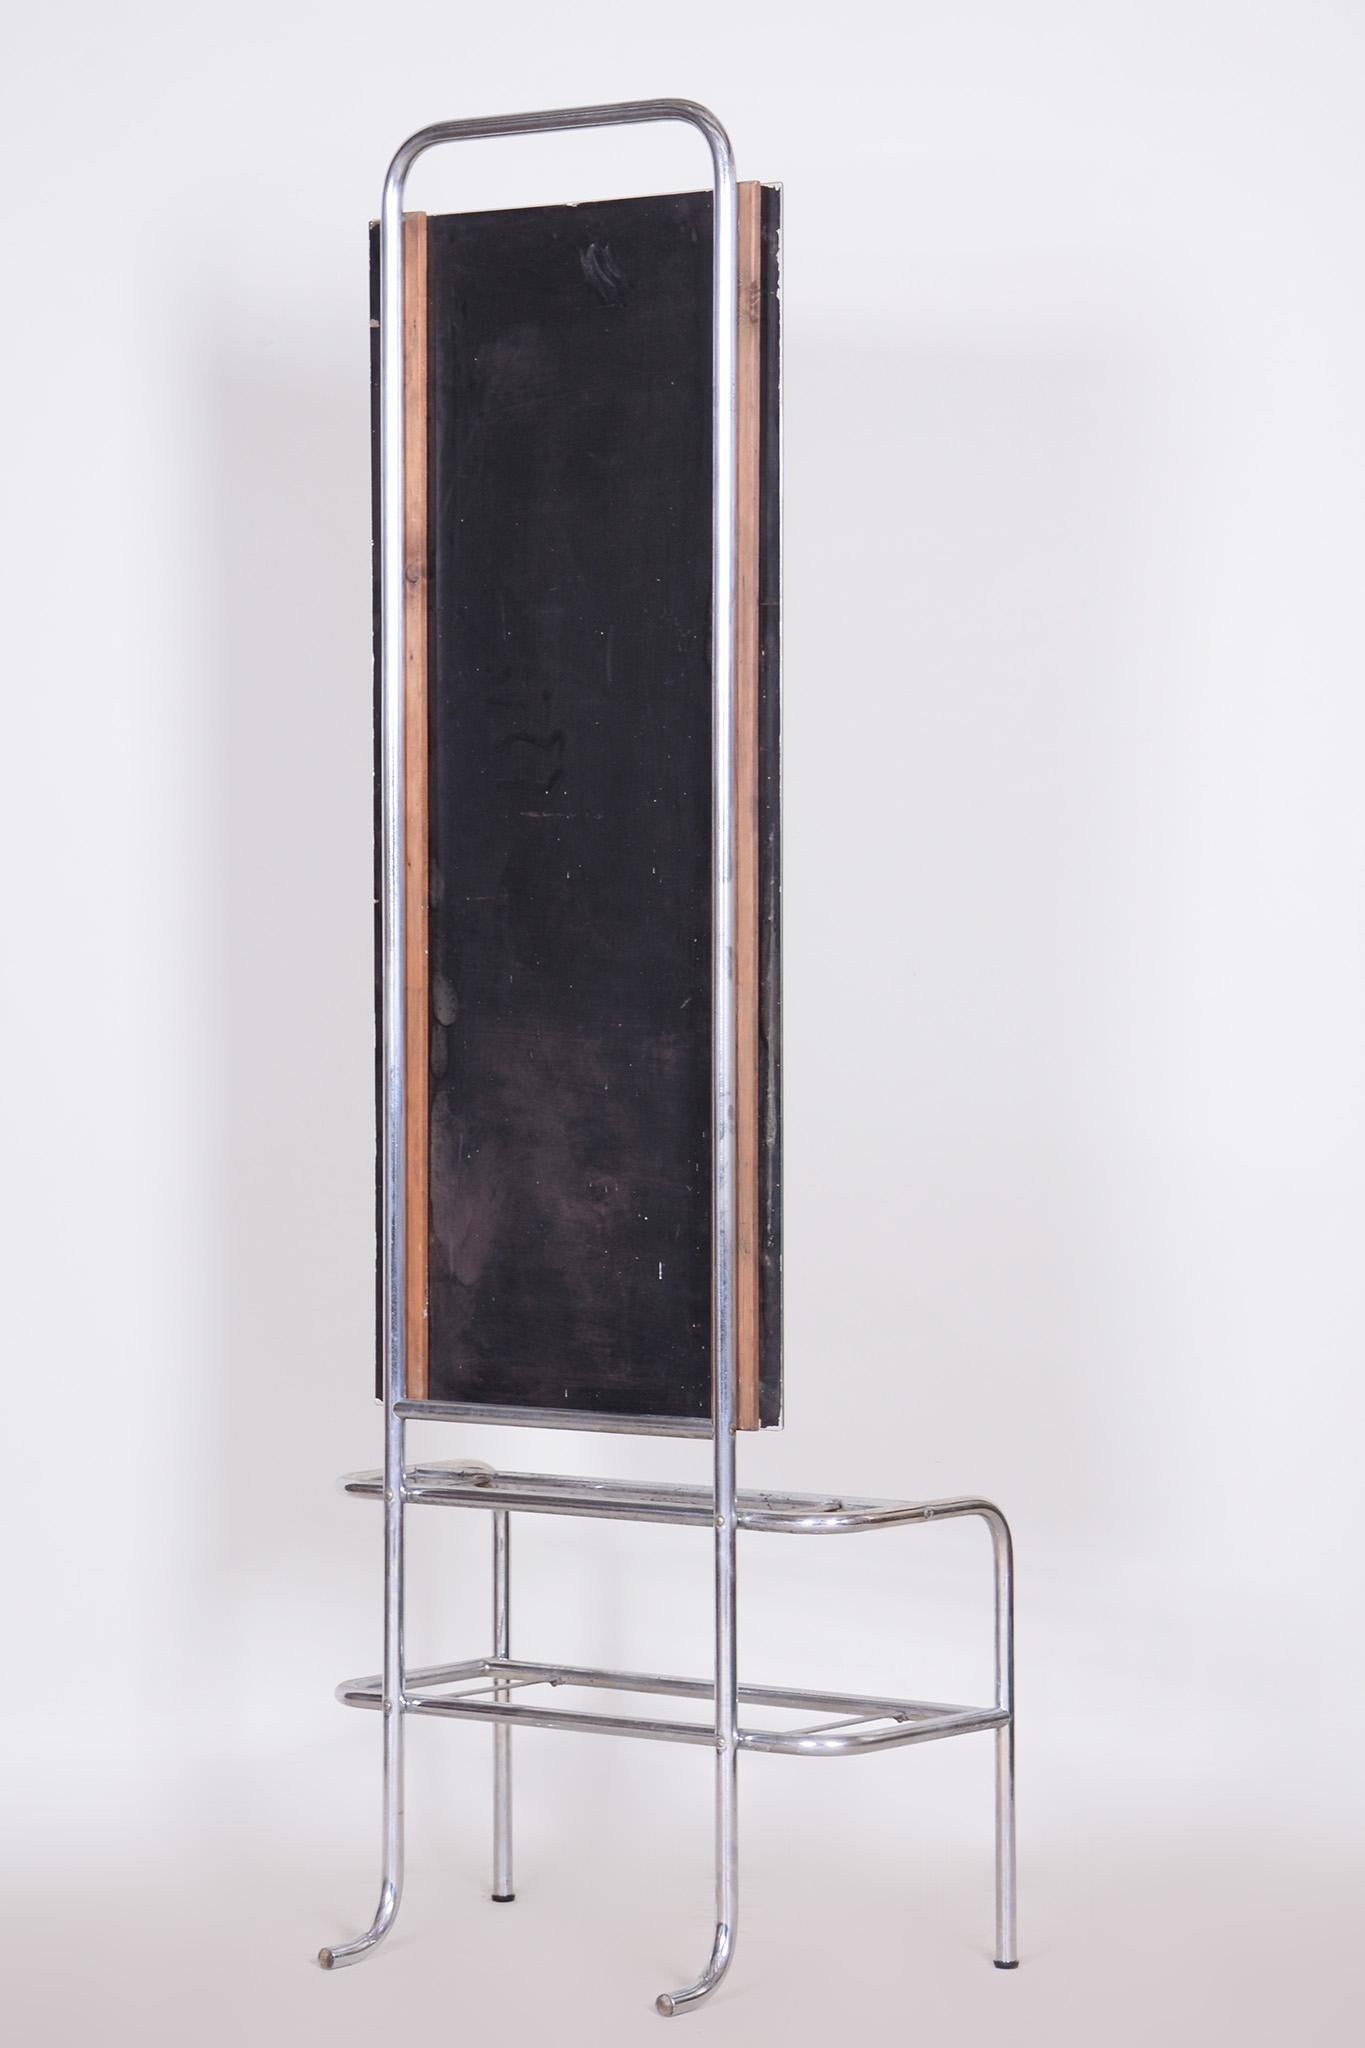 Restored Bauhaus dressing mirror.

Period: 1930-1939
Source: Czechia
Material: chrome-plated steel, mirror, glass
New glass shelves and mirror.

The chrome parts have been cleaned and professionally restored. 

It has been fully restored by